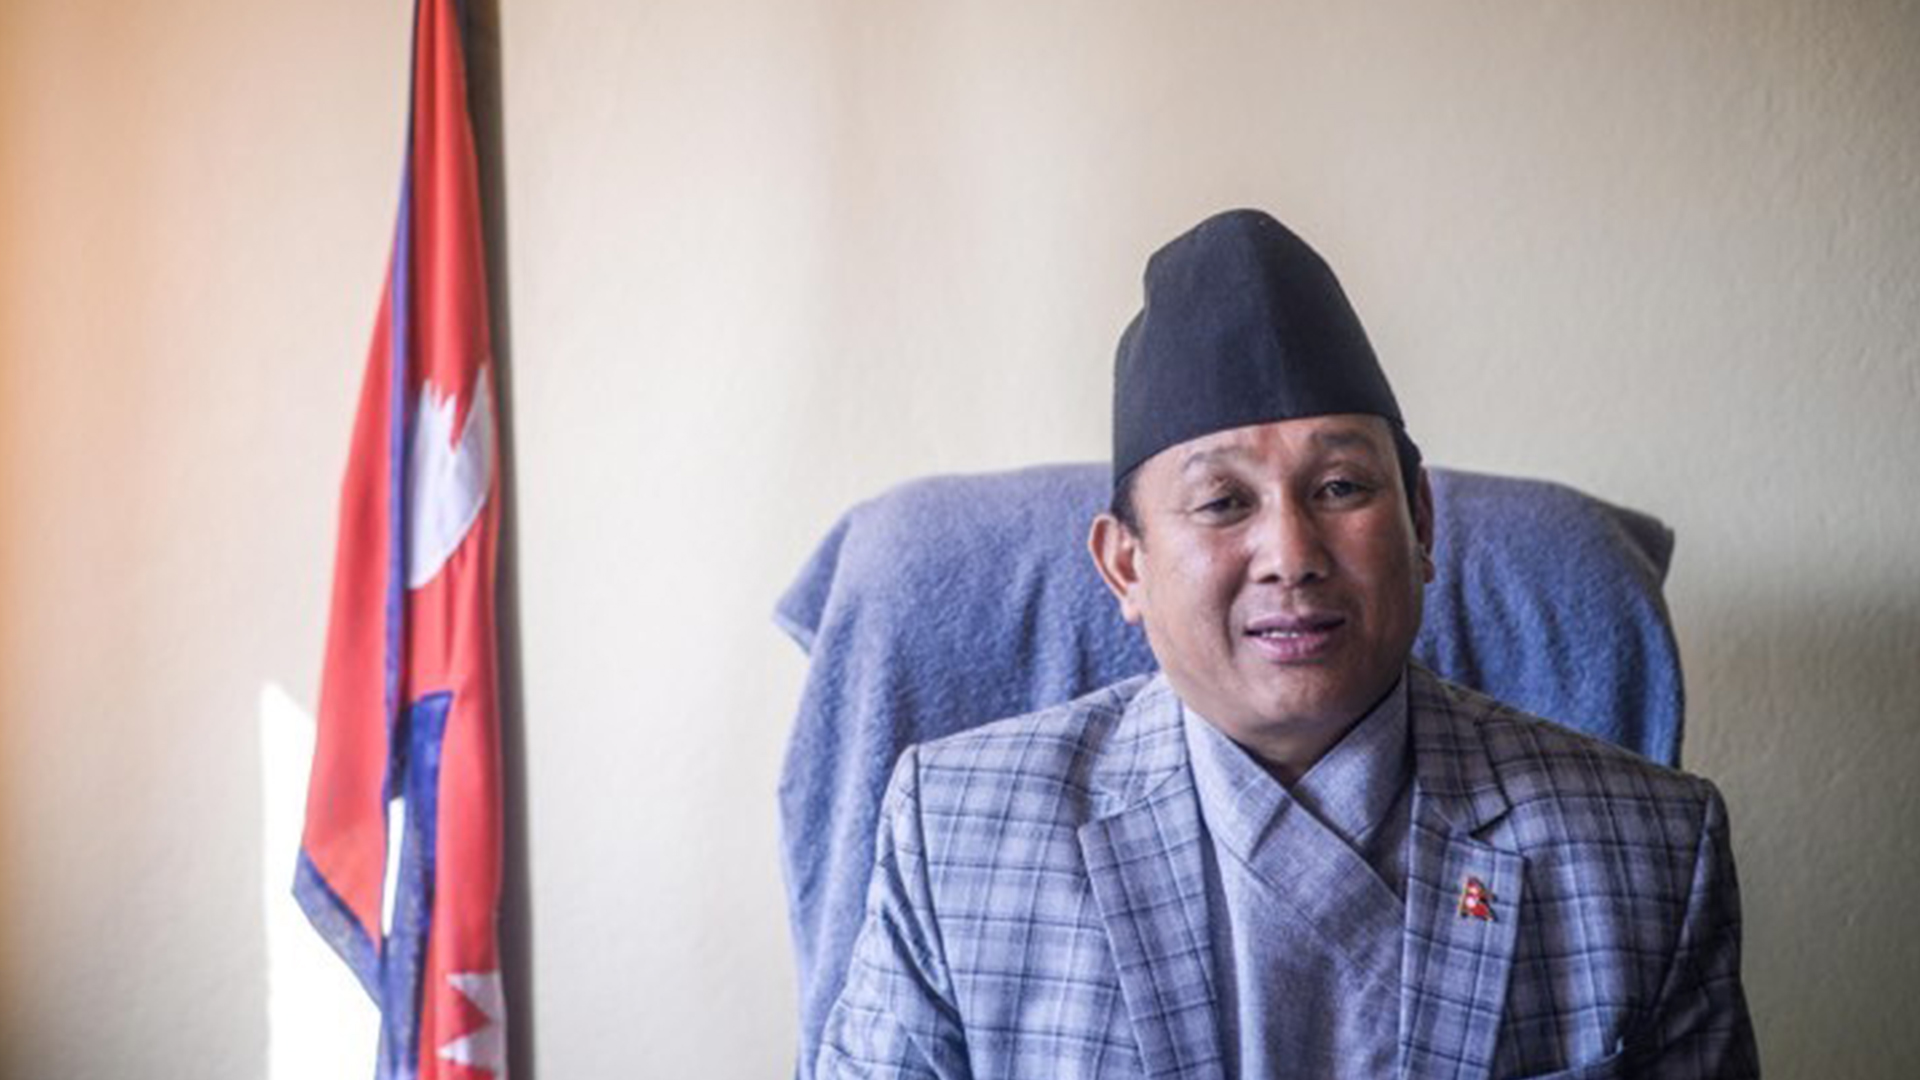 We will provide internet to every ward office, school and house: Minister Gurung